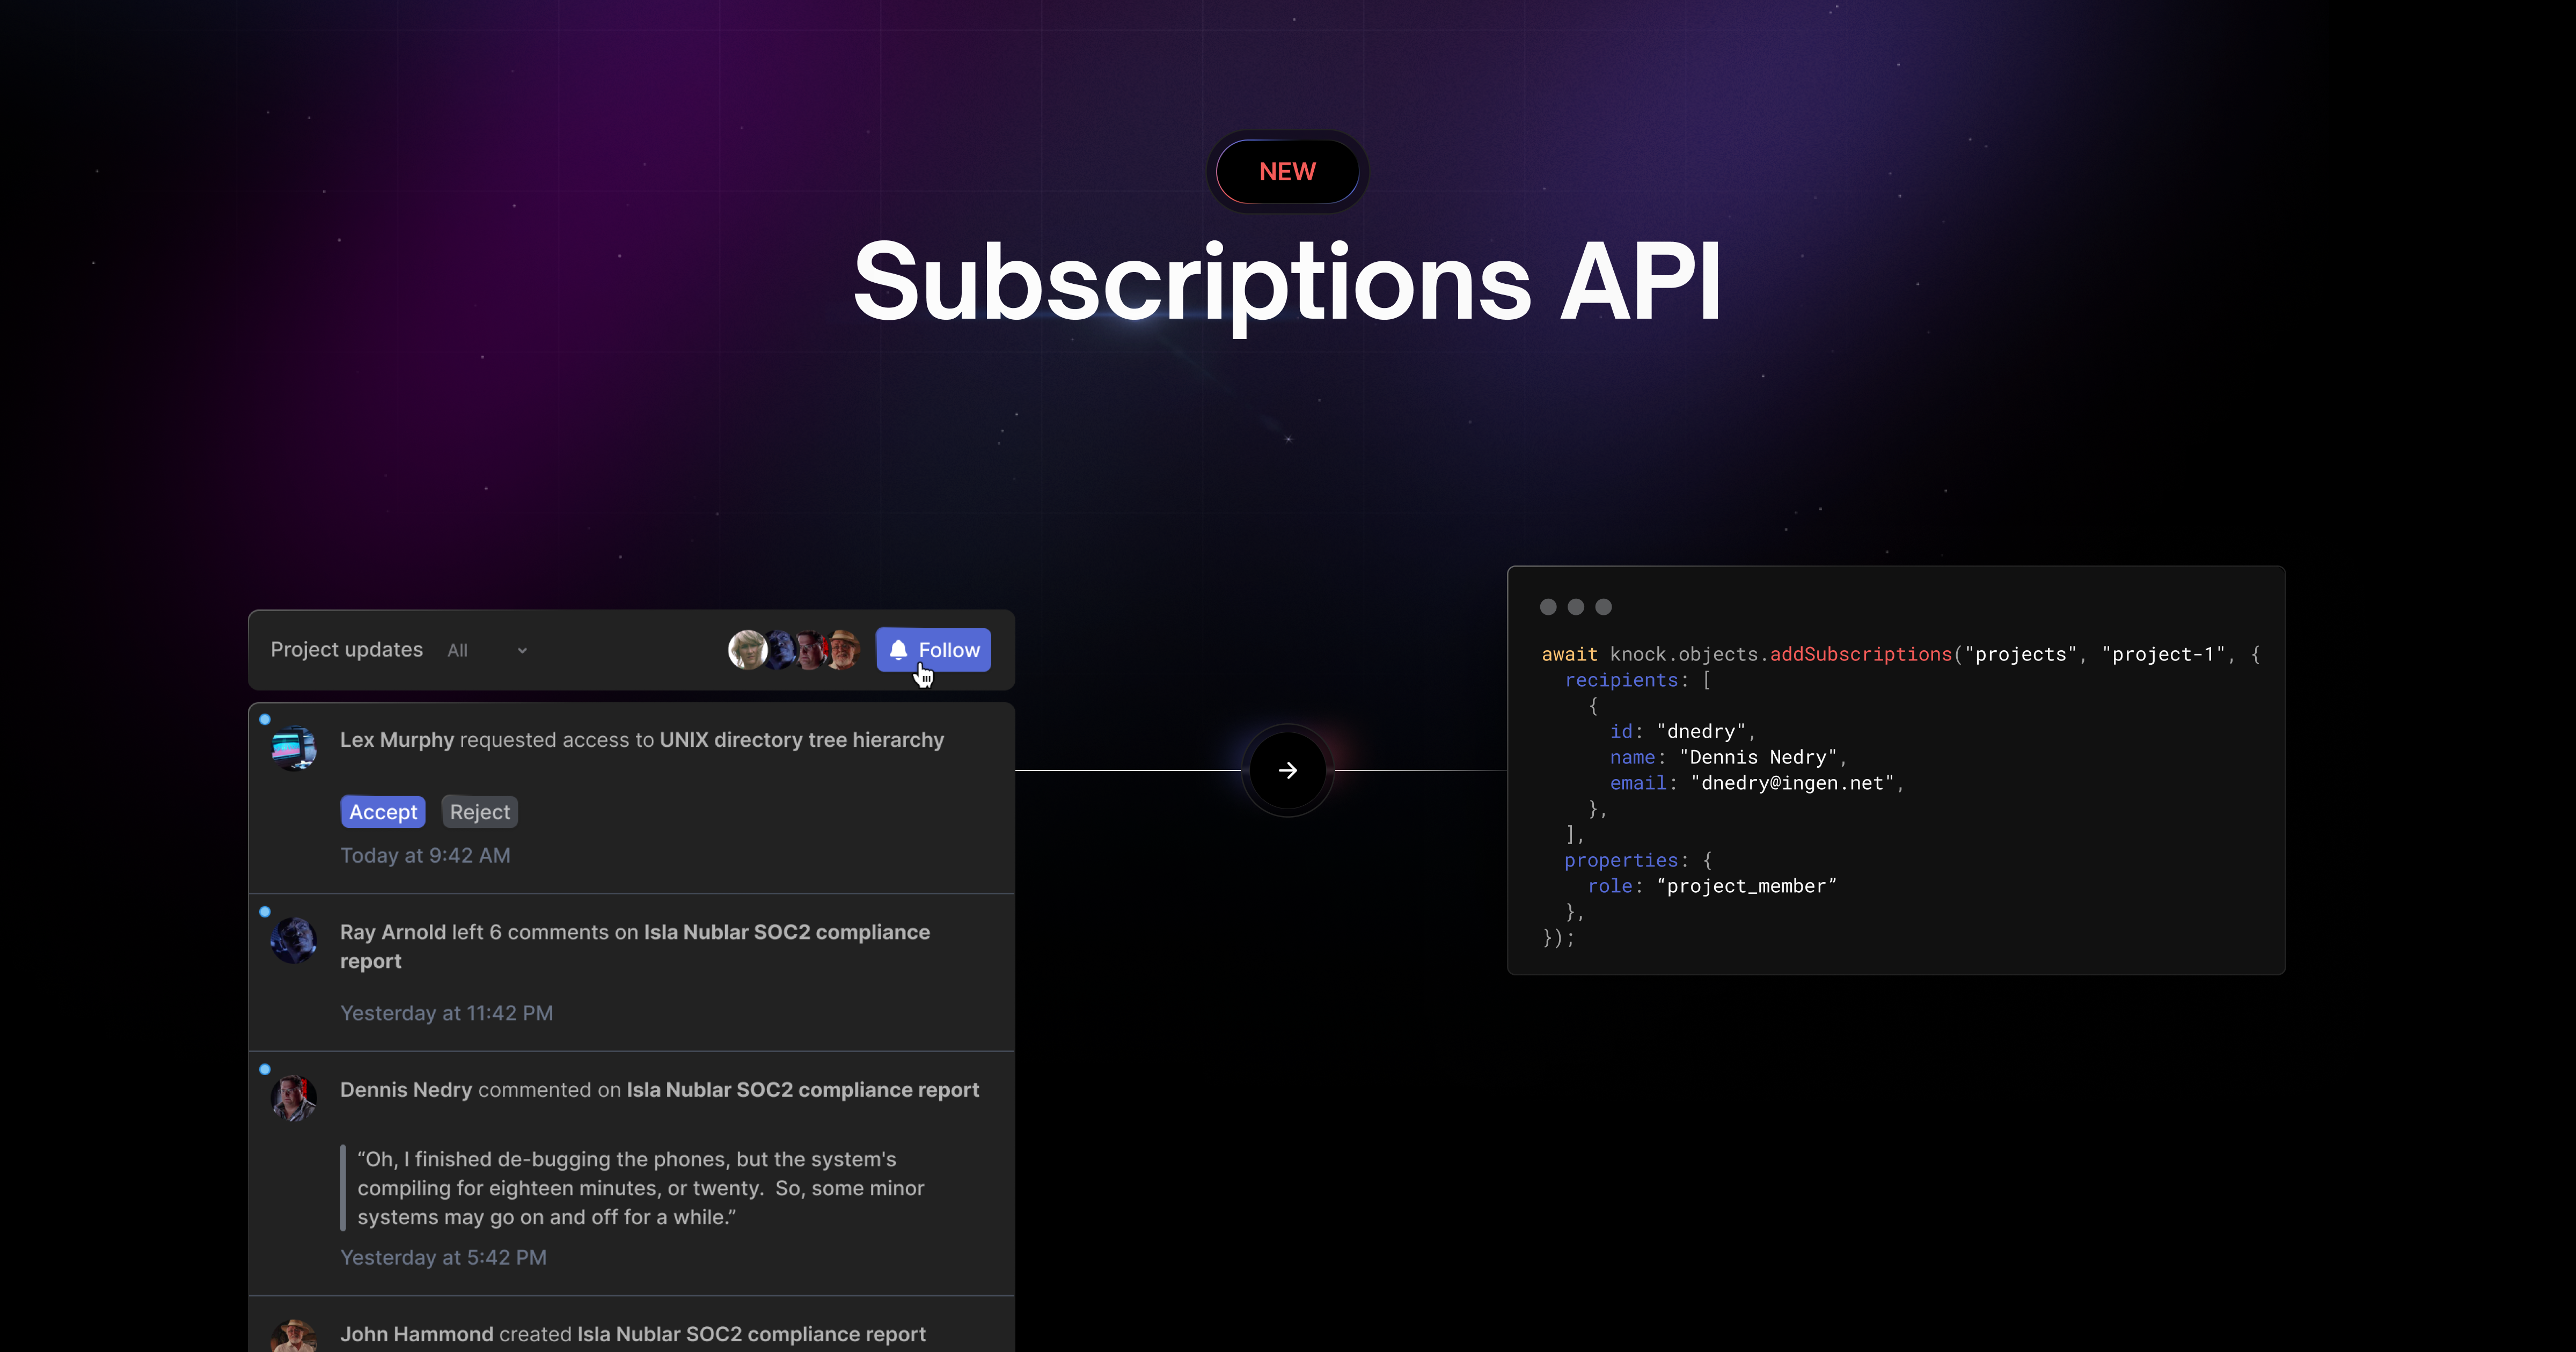 Announcing the subscriptions API